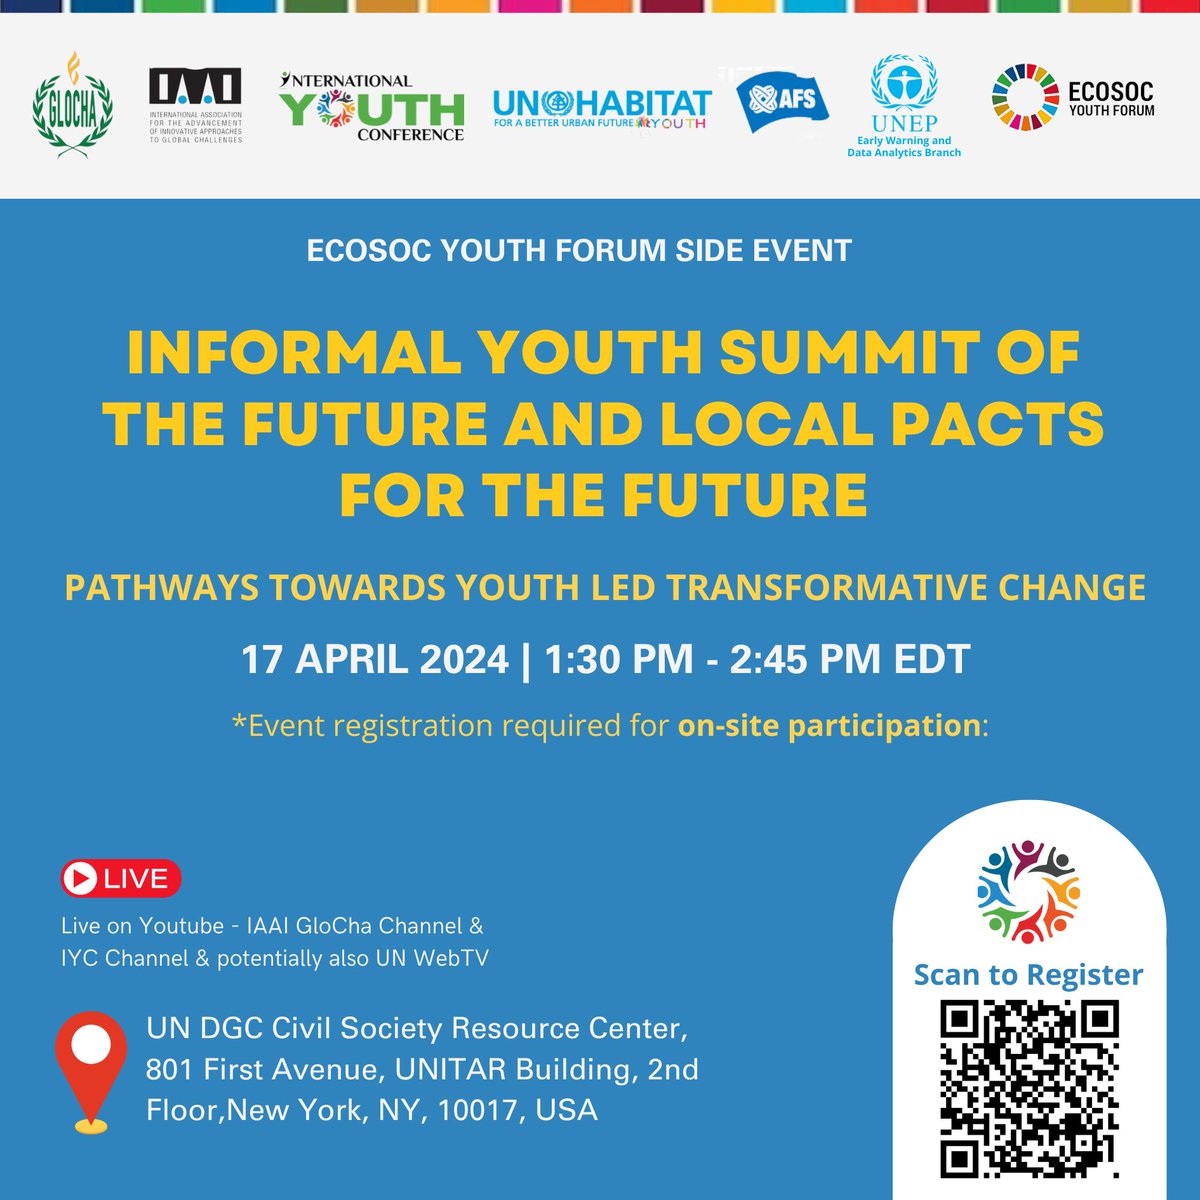 Join us for #ECOSOC Youth forum Side event “Informal Youth Summit of the Future and Local Pacts for the Future' on April 17, 1:30-2:45 PM EDT. ➡️ Register for on-site participation or catch the livestream : docs.google.com/forms/d/e/1FAI… #YouthEmpowerment